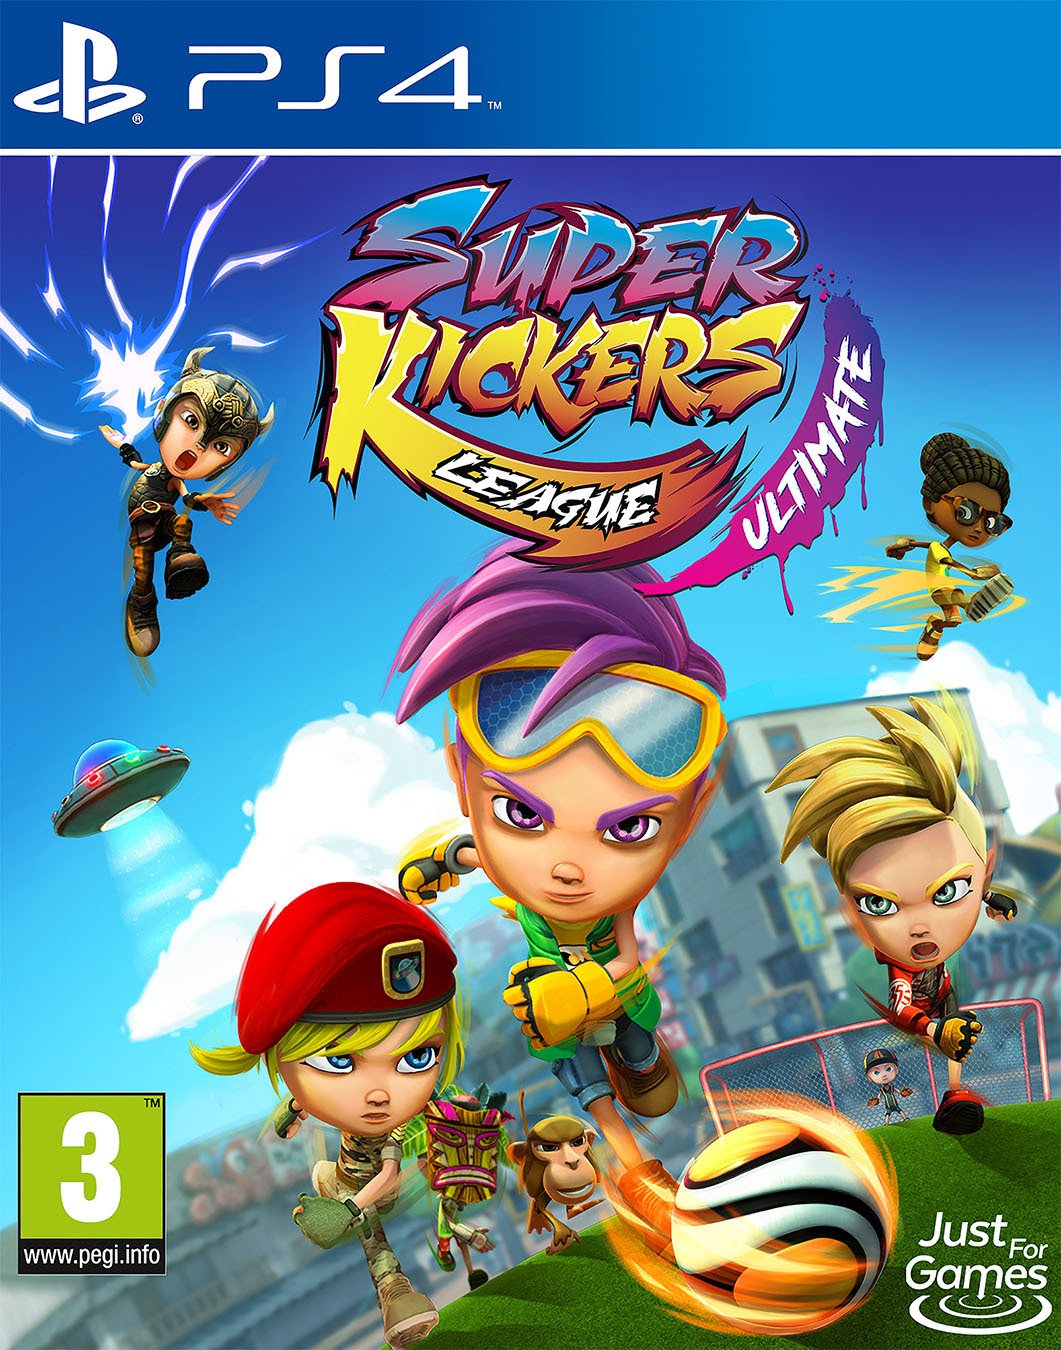 Super Kickers League Ultimate PS4 Game Review